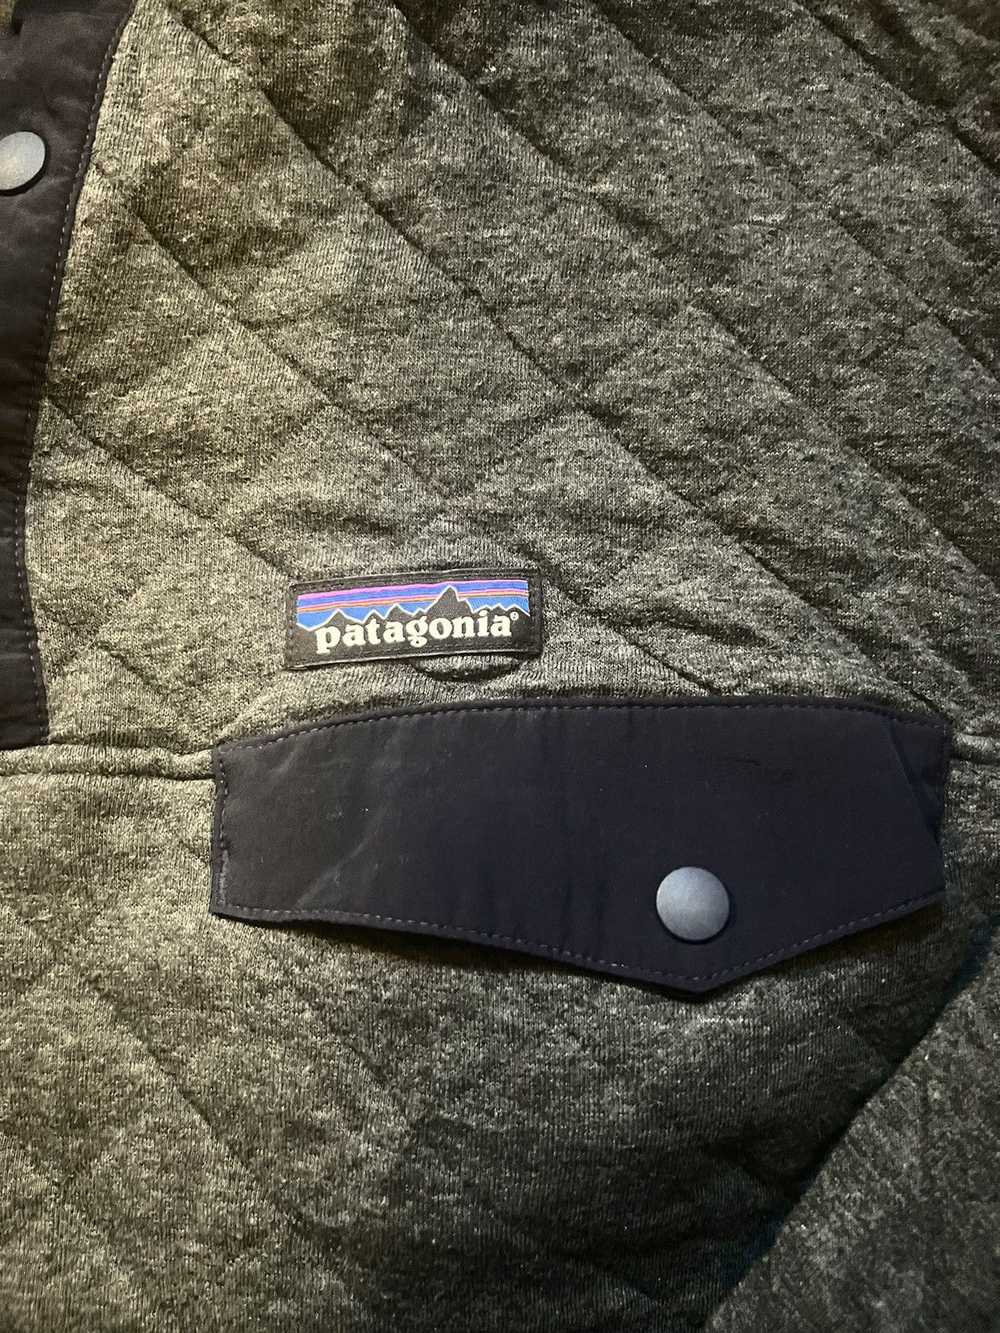 Patagonia Quilted Patagonia Pullover - image 2